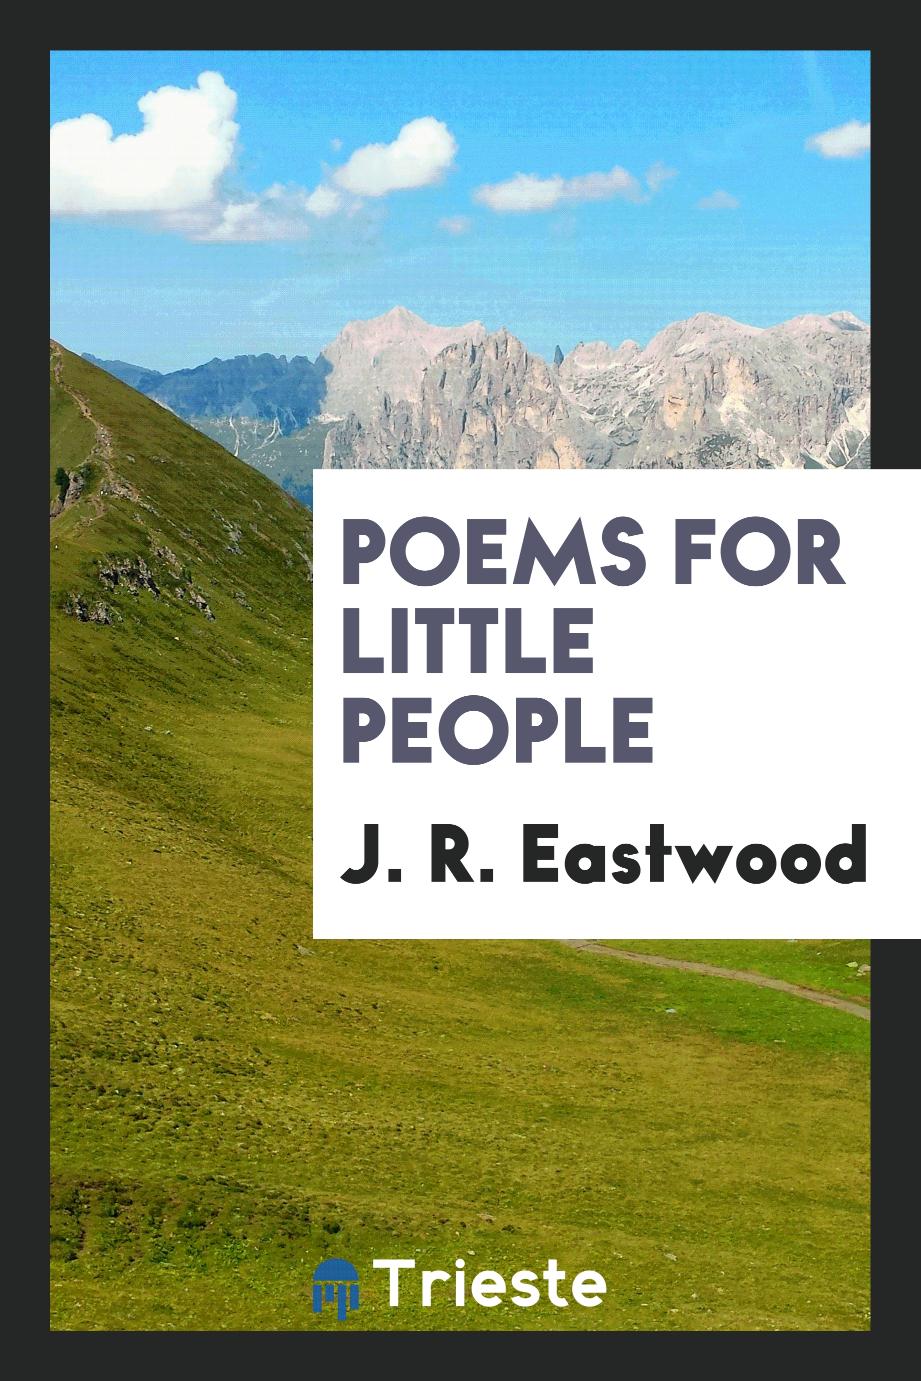 Poems for little people